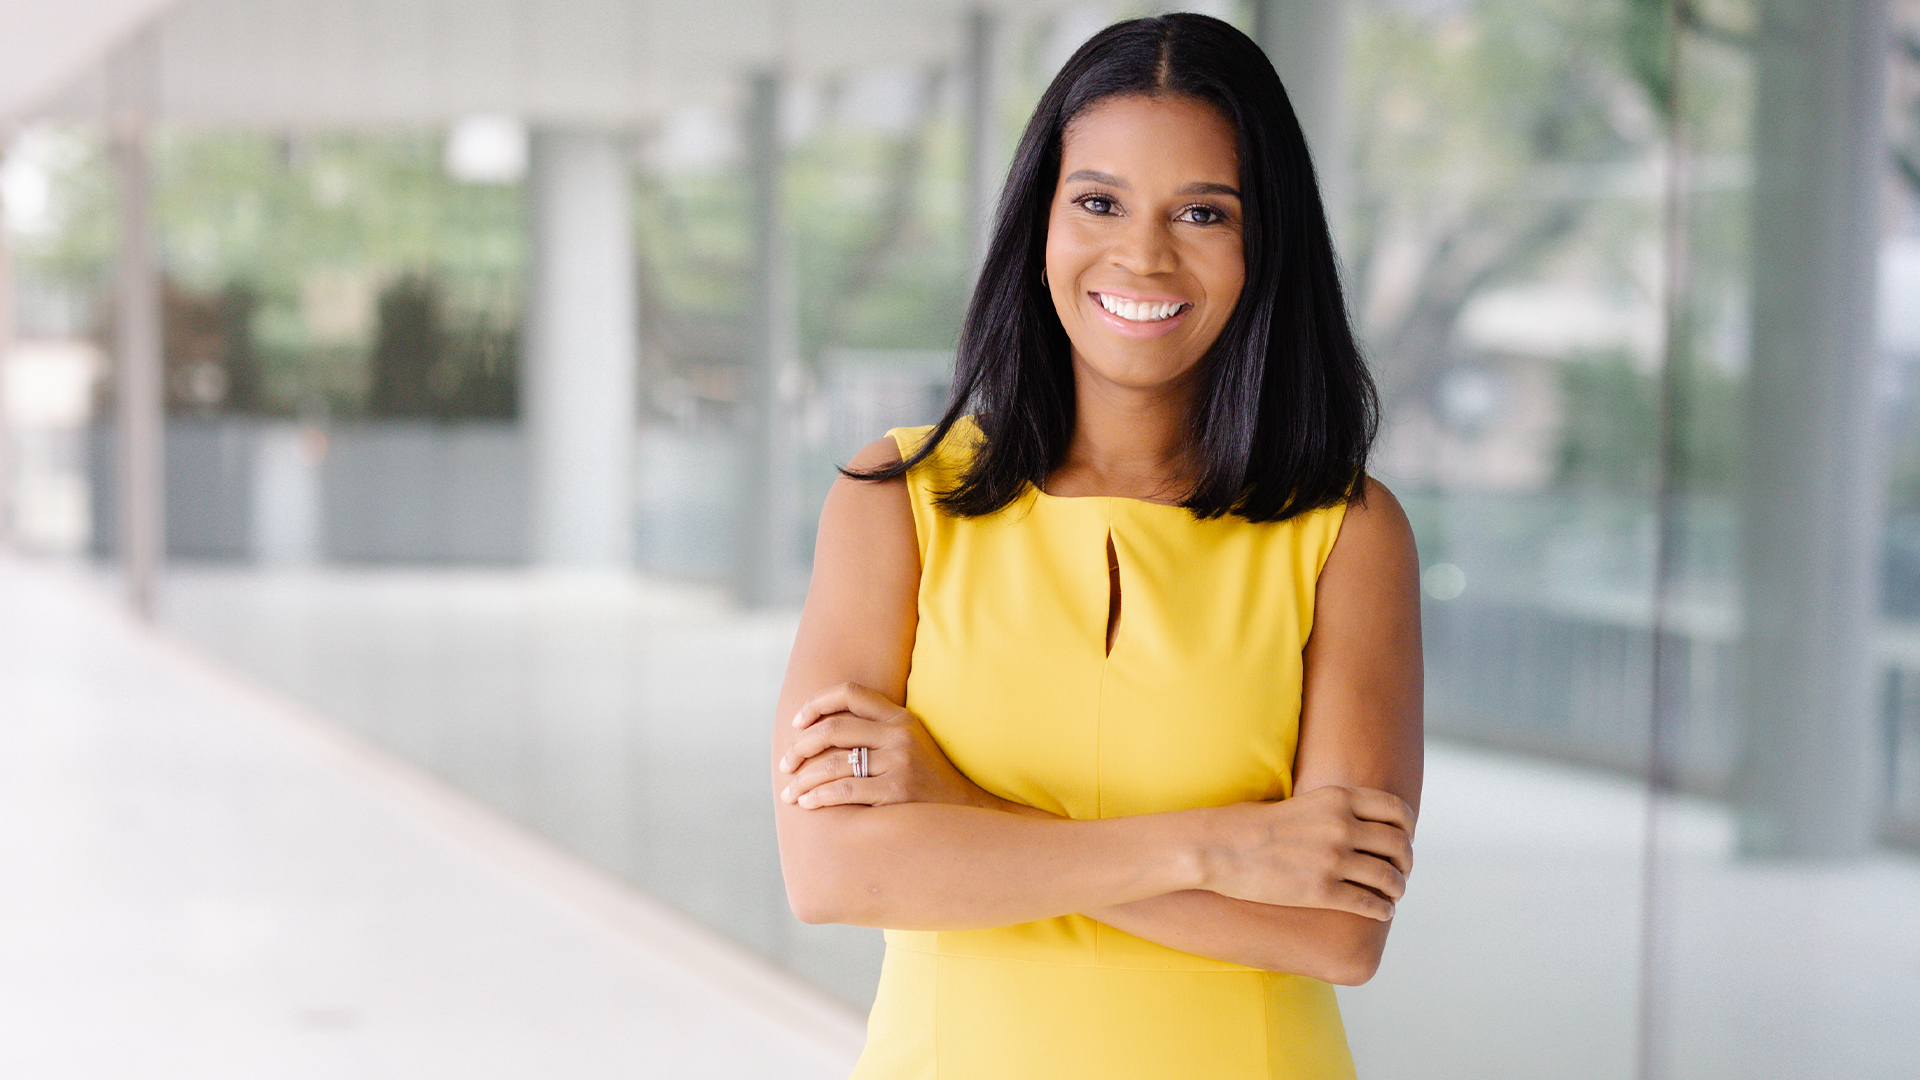 Mandy Price Joins Less Than 20 Black Women Founders To Raise Over $10M After Kanarys, Inc.'s $5M Series A